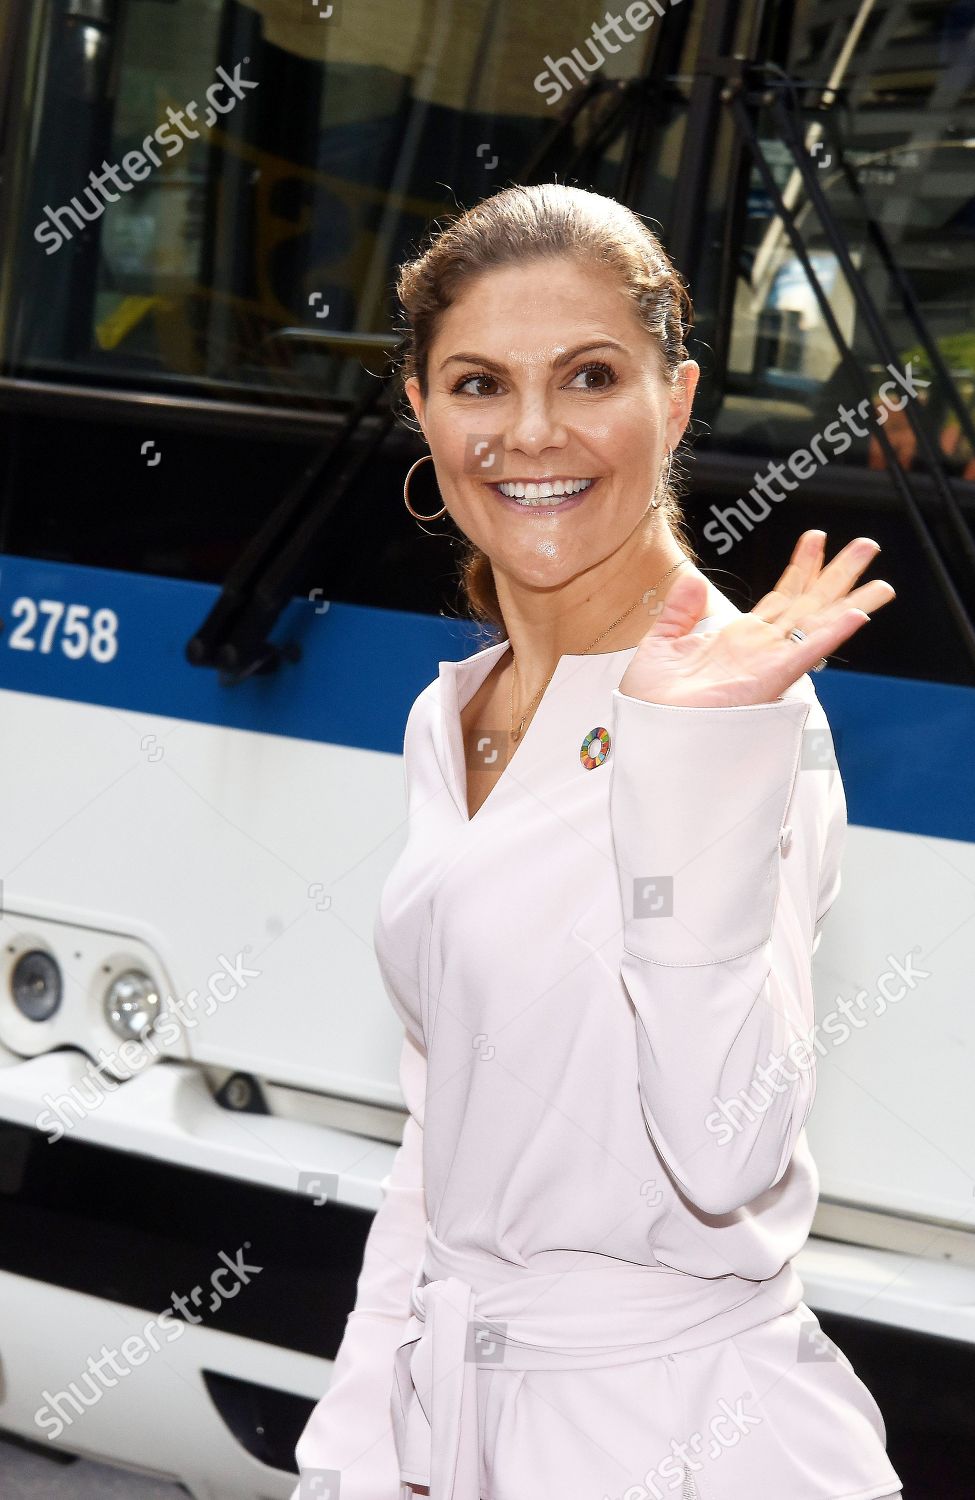 crown-princess-victoria-visit-to-new-york-usa-shutterstock-editorial-9888712a.jpg